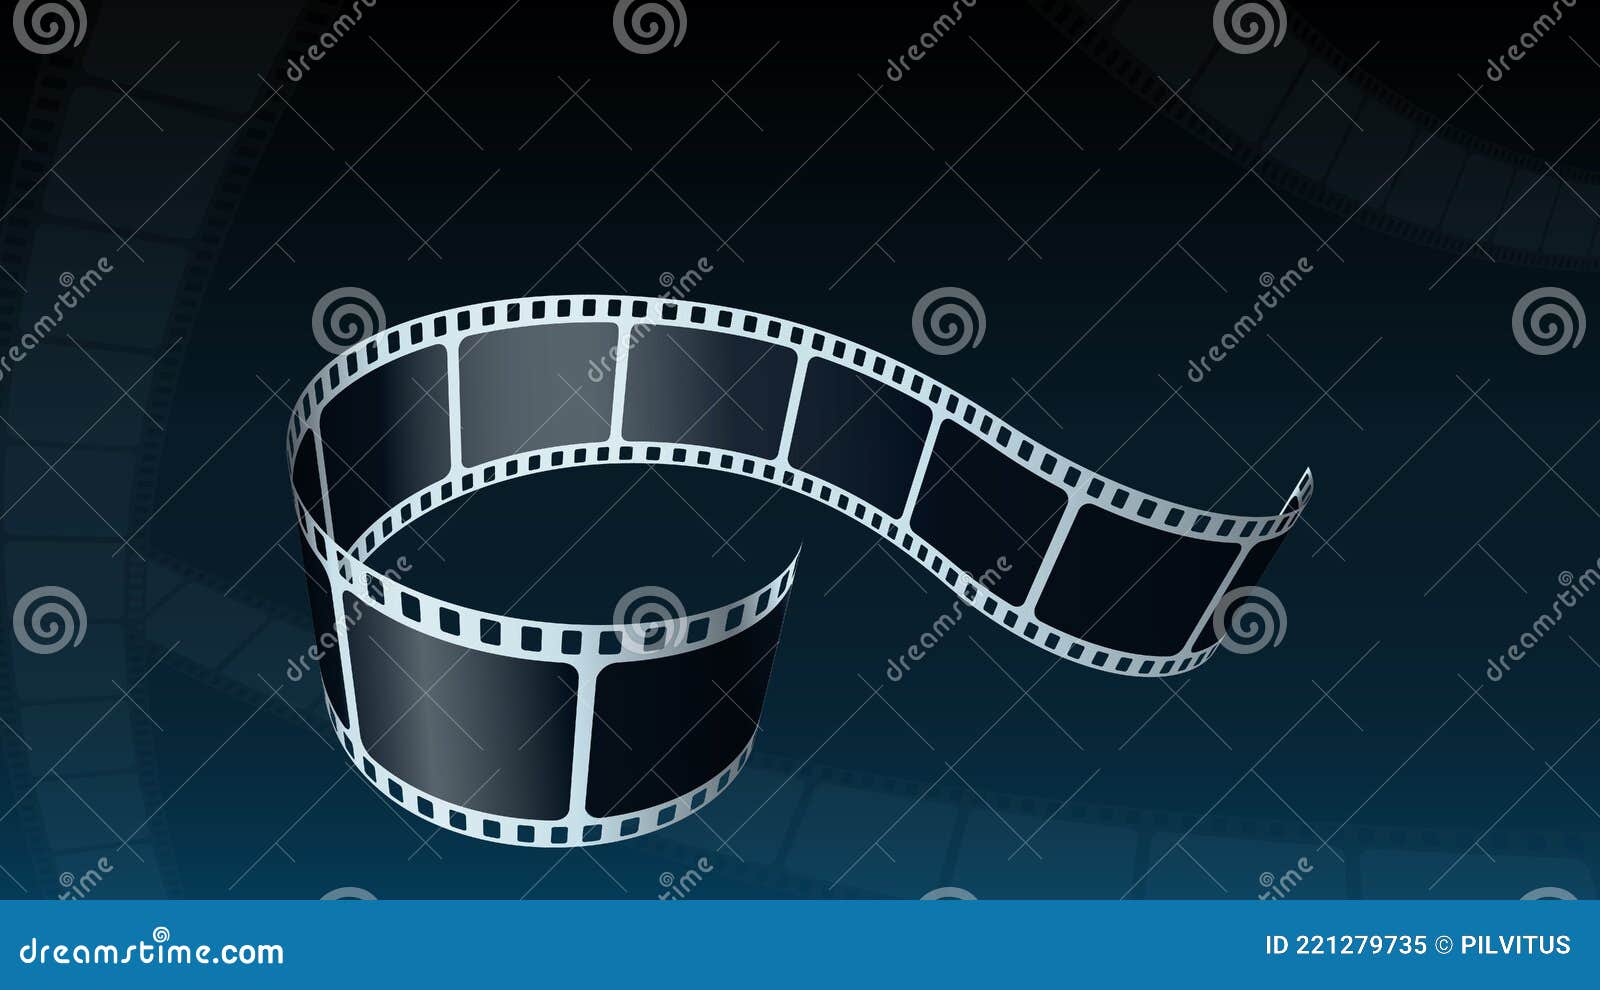 https://thumbs.dreamstime.com/z/camera-film-roll-isolated-abstract-blue-background-realistic-strip-perspective-projection-movie-cinema-design-221279735.jpg